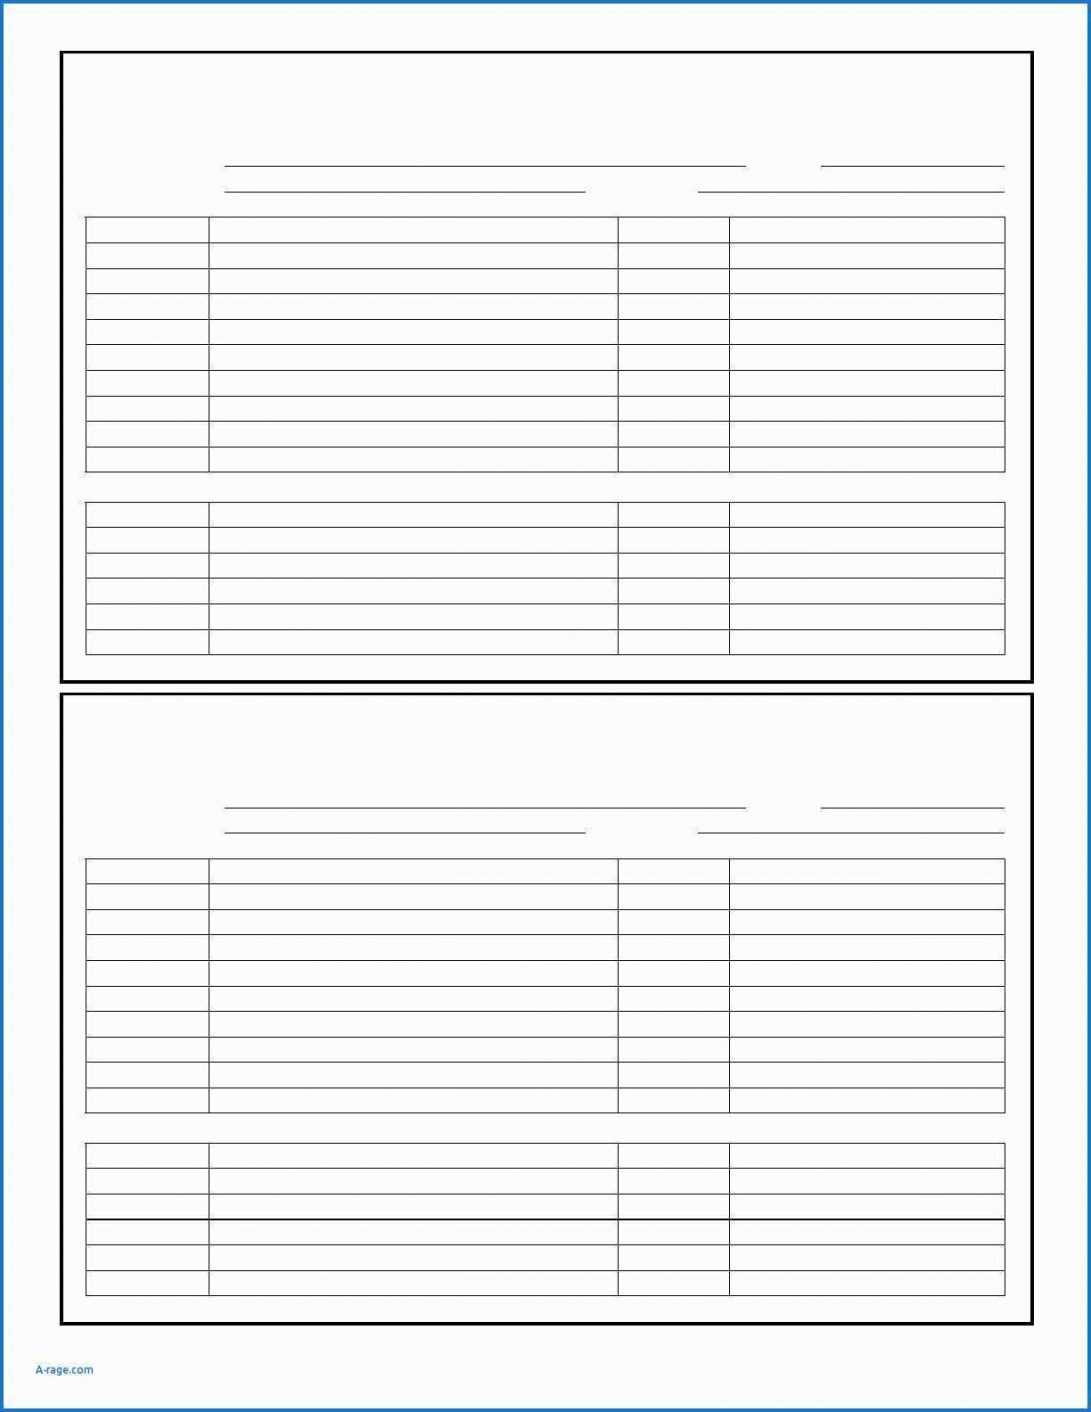 batting-order-template-pdf-excel-lineup-baseball-card-for-softball-certificate-templates